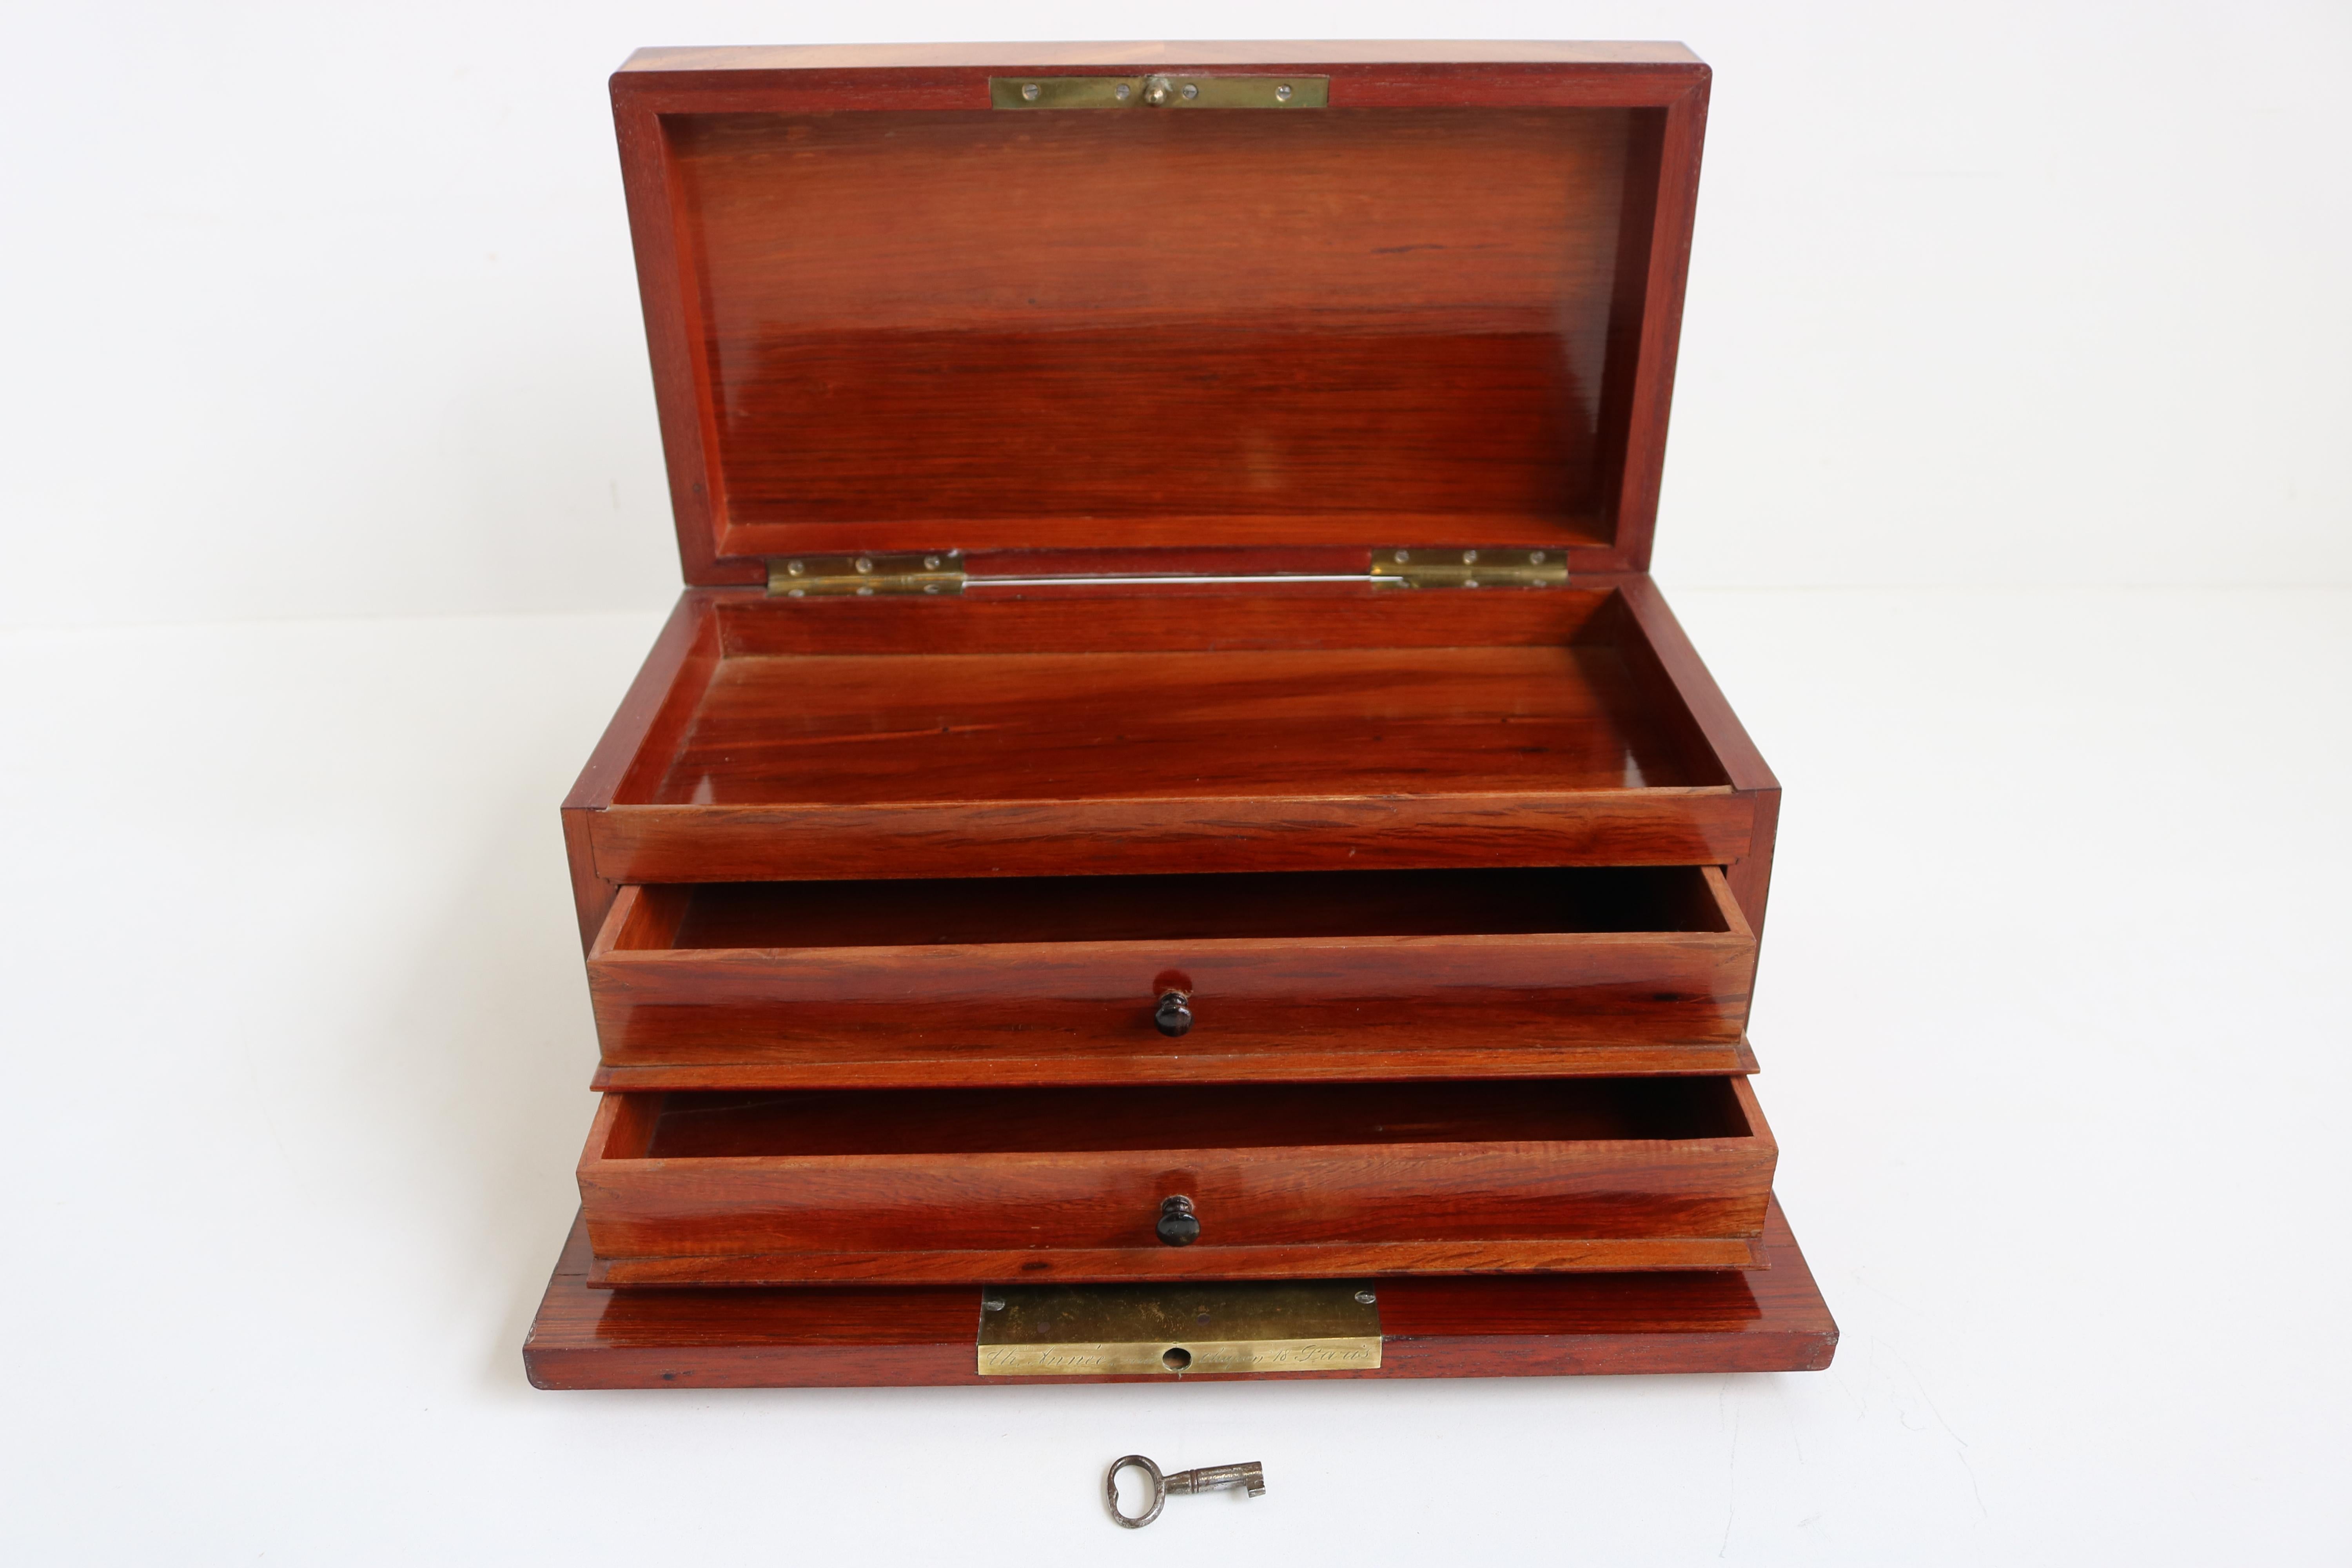 Gorgeous French Jewelry box / collectors box by Théodore Année made in Paris during the 19th century in the Napoleon III period. 
Amazing craftsmanship with multiple inlaid woods, the piece is signed on the lock ''Th. Année, Rue Chapon 18, Paris''